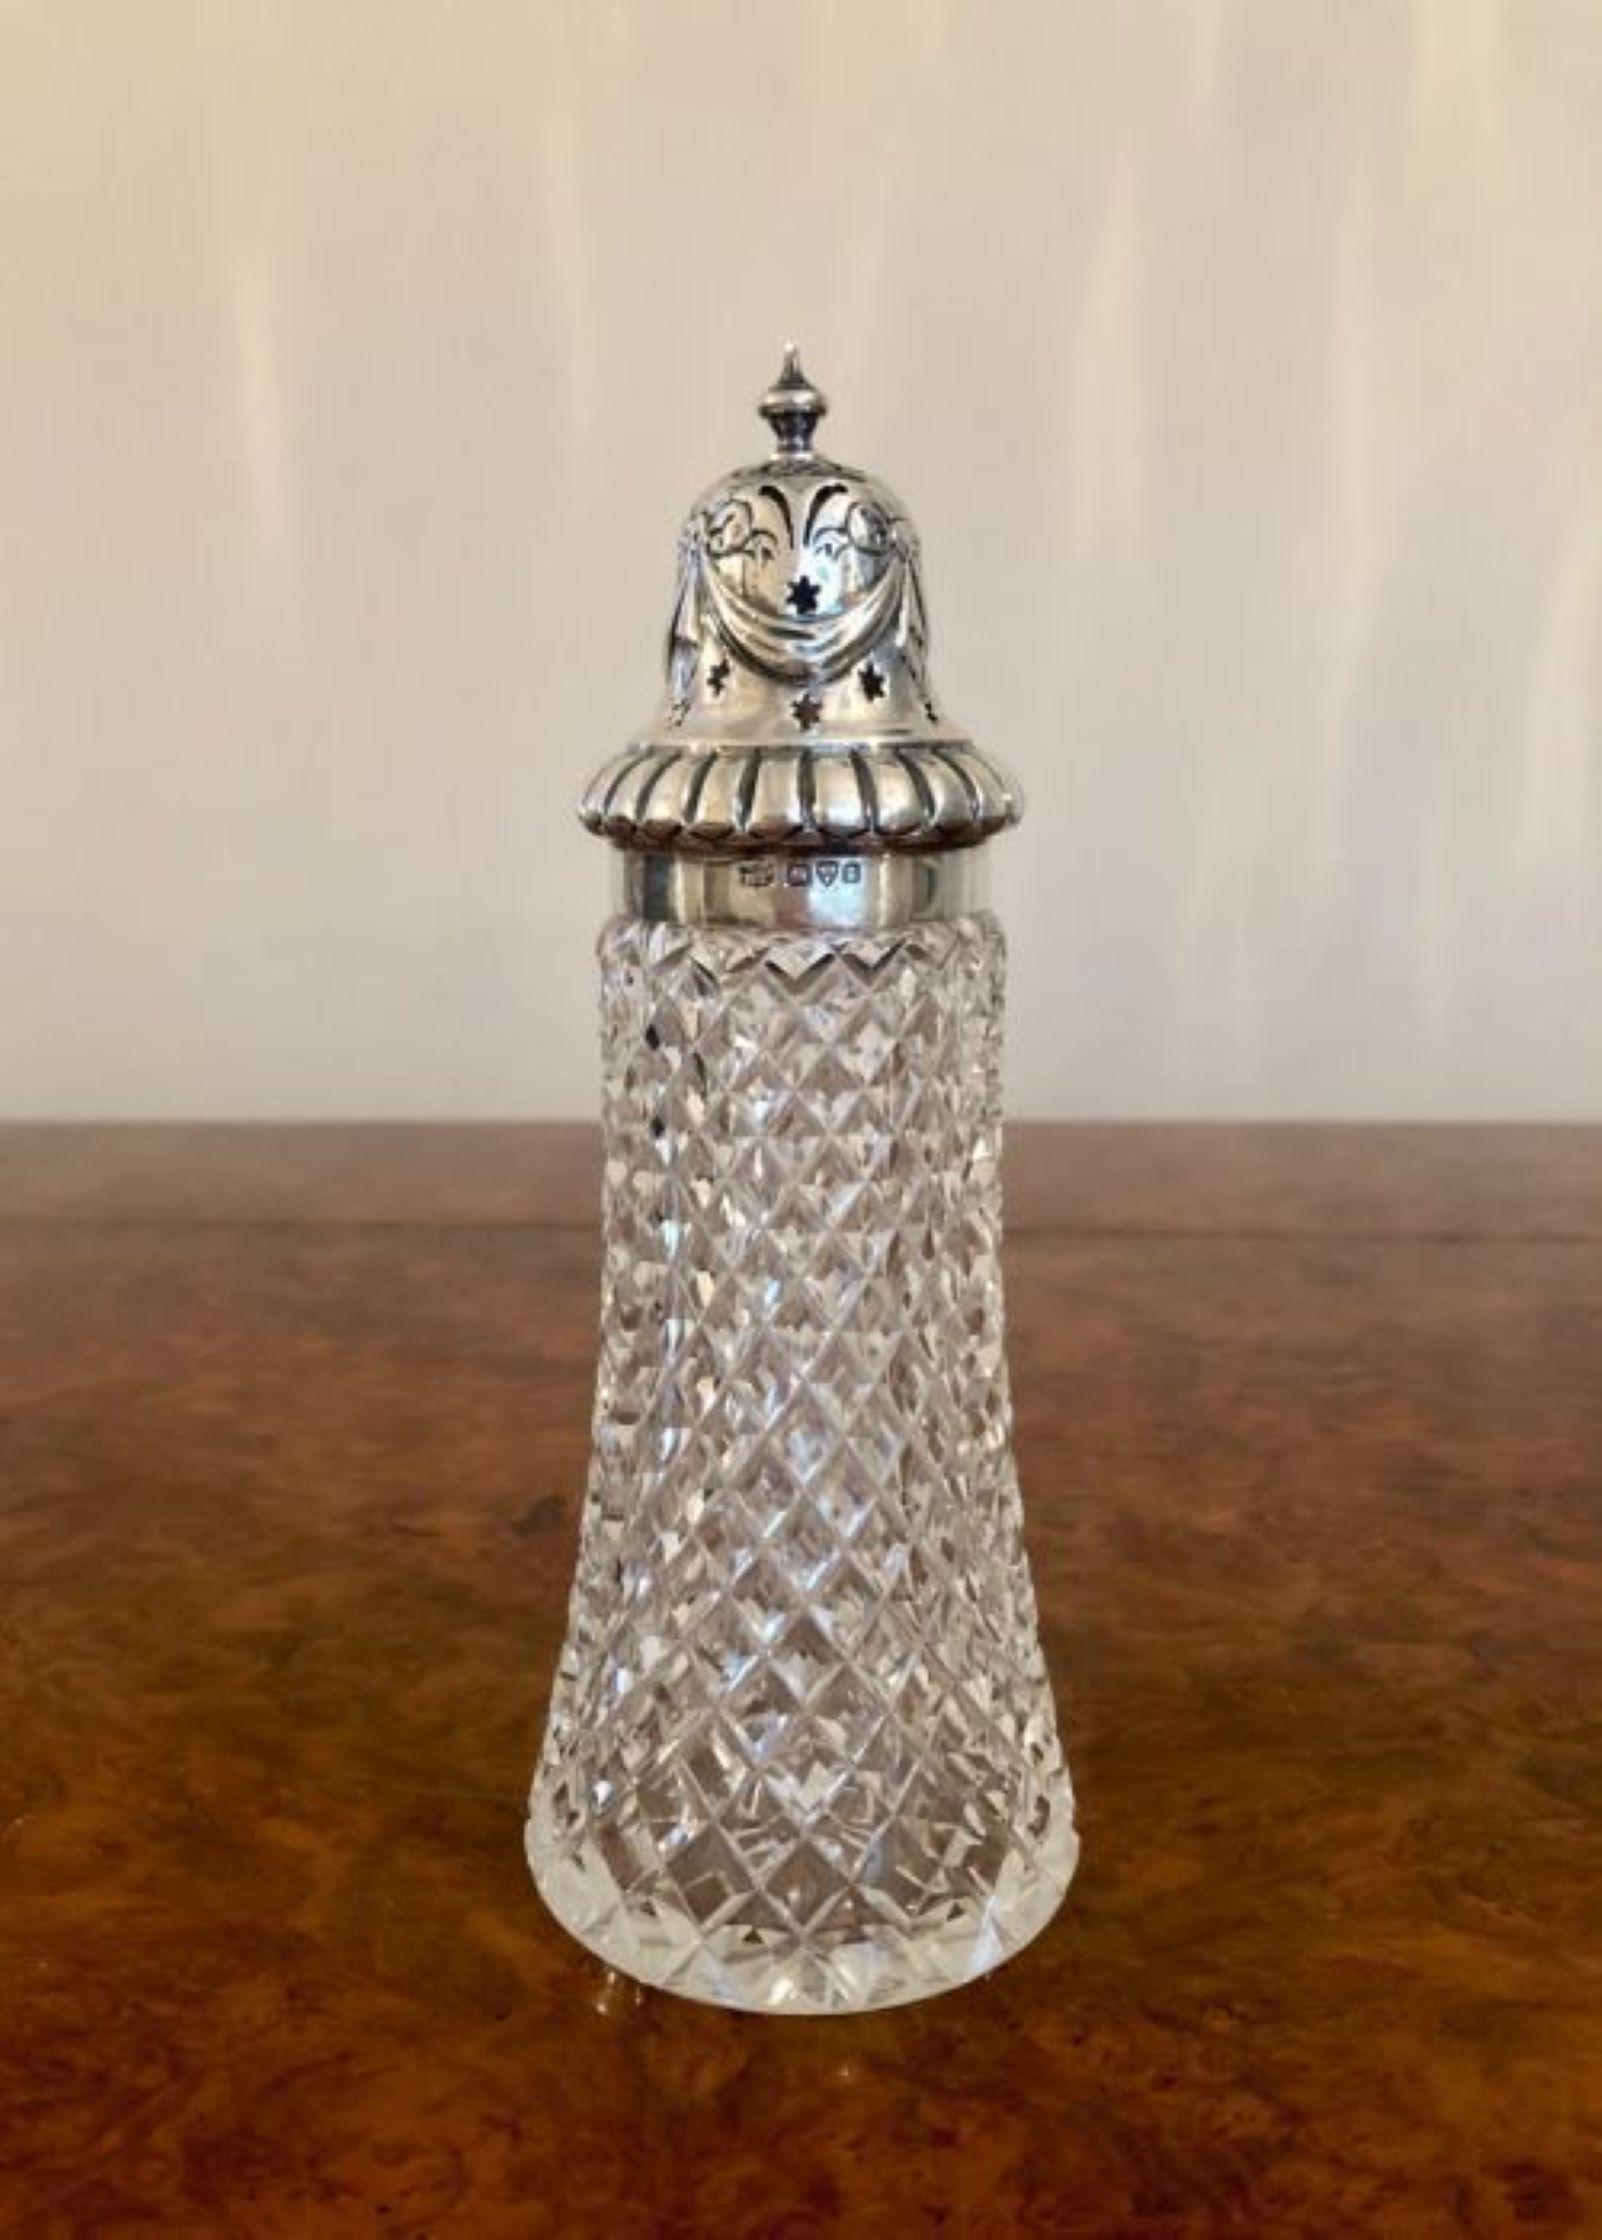 Quality Edward VII solid silver & cut glass sugar caster, having a turned effect finial above a swag, beautiful tied bow & star pierced removable silver hall marked top on top of a cut glass body with a star cut base. 